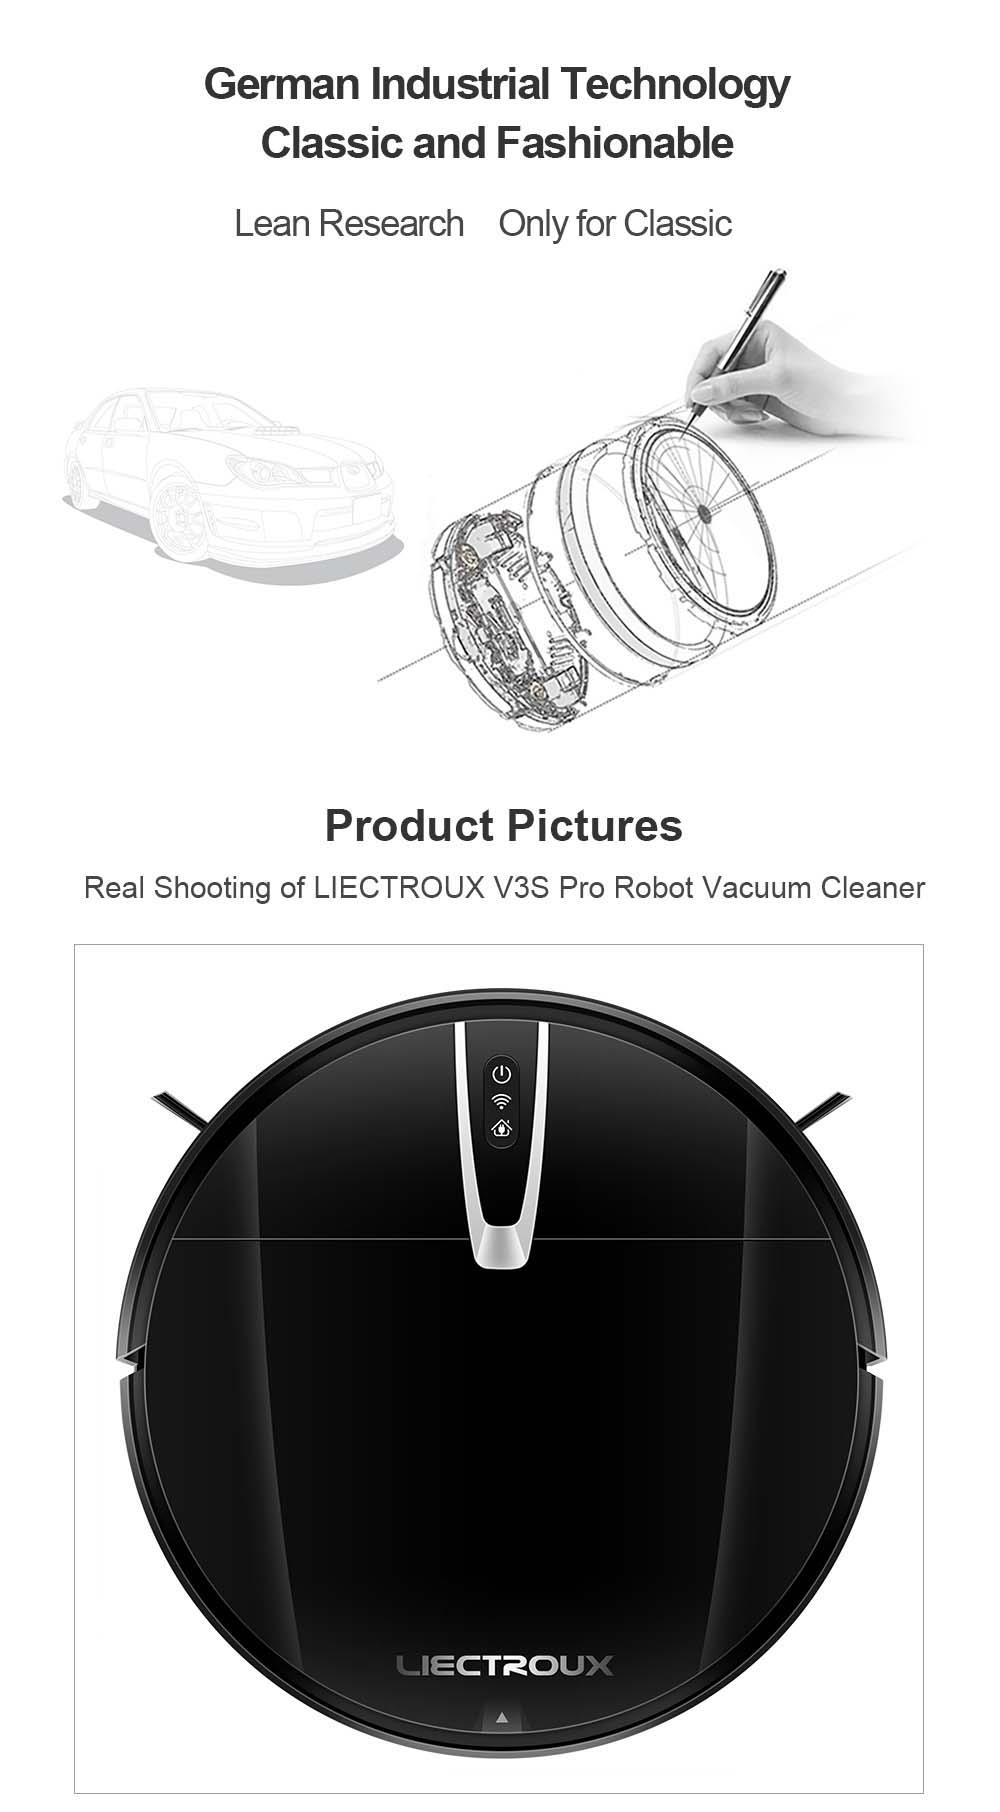 LIECTROUX V3S Pro Robot Vacuum Cleaner, 4000Pa Suction, Dry Wet Mopping, 2D Map Navigation, with Memory, WiFi App Voice